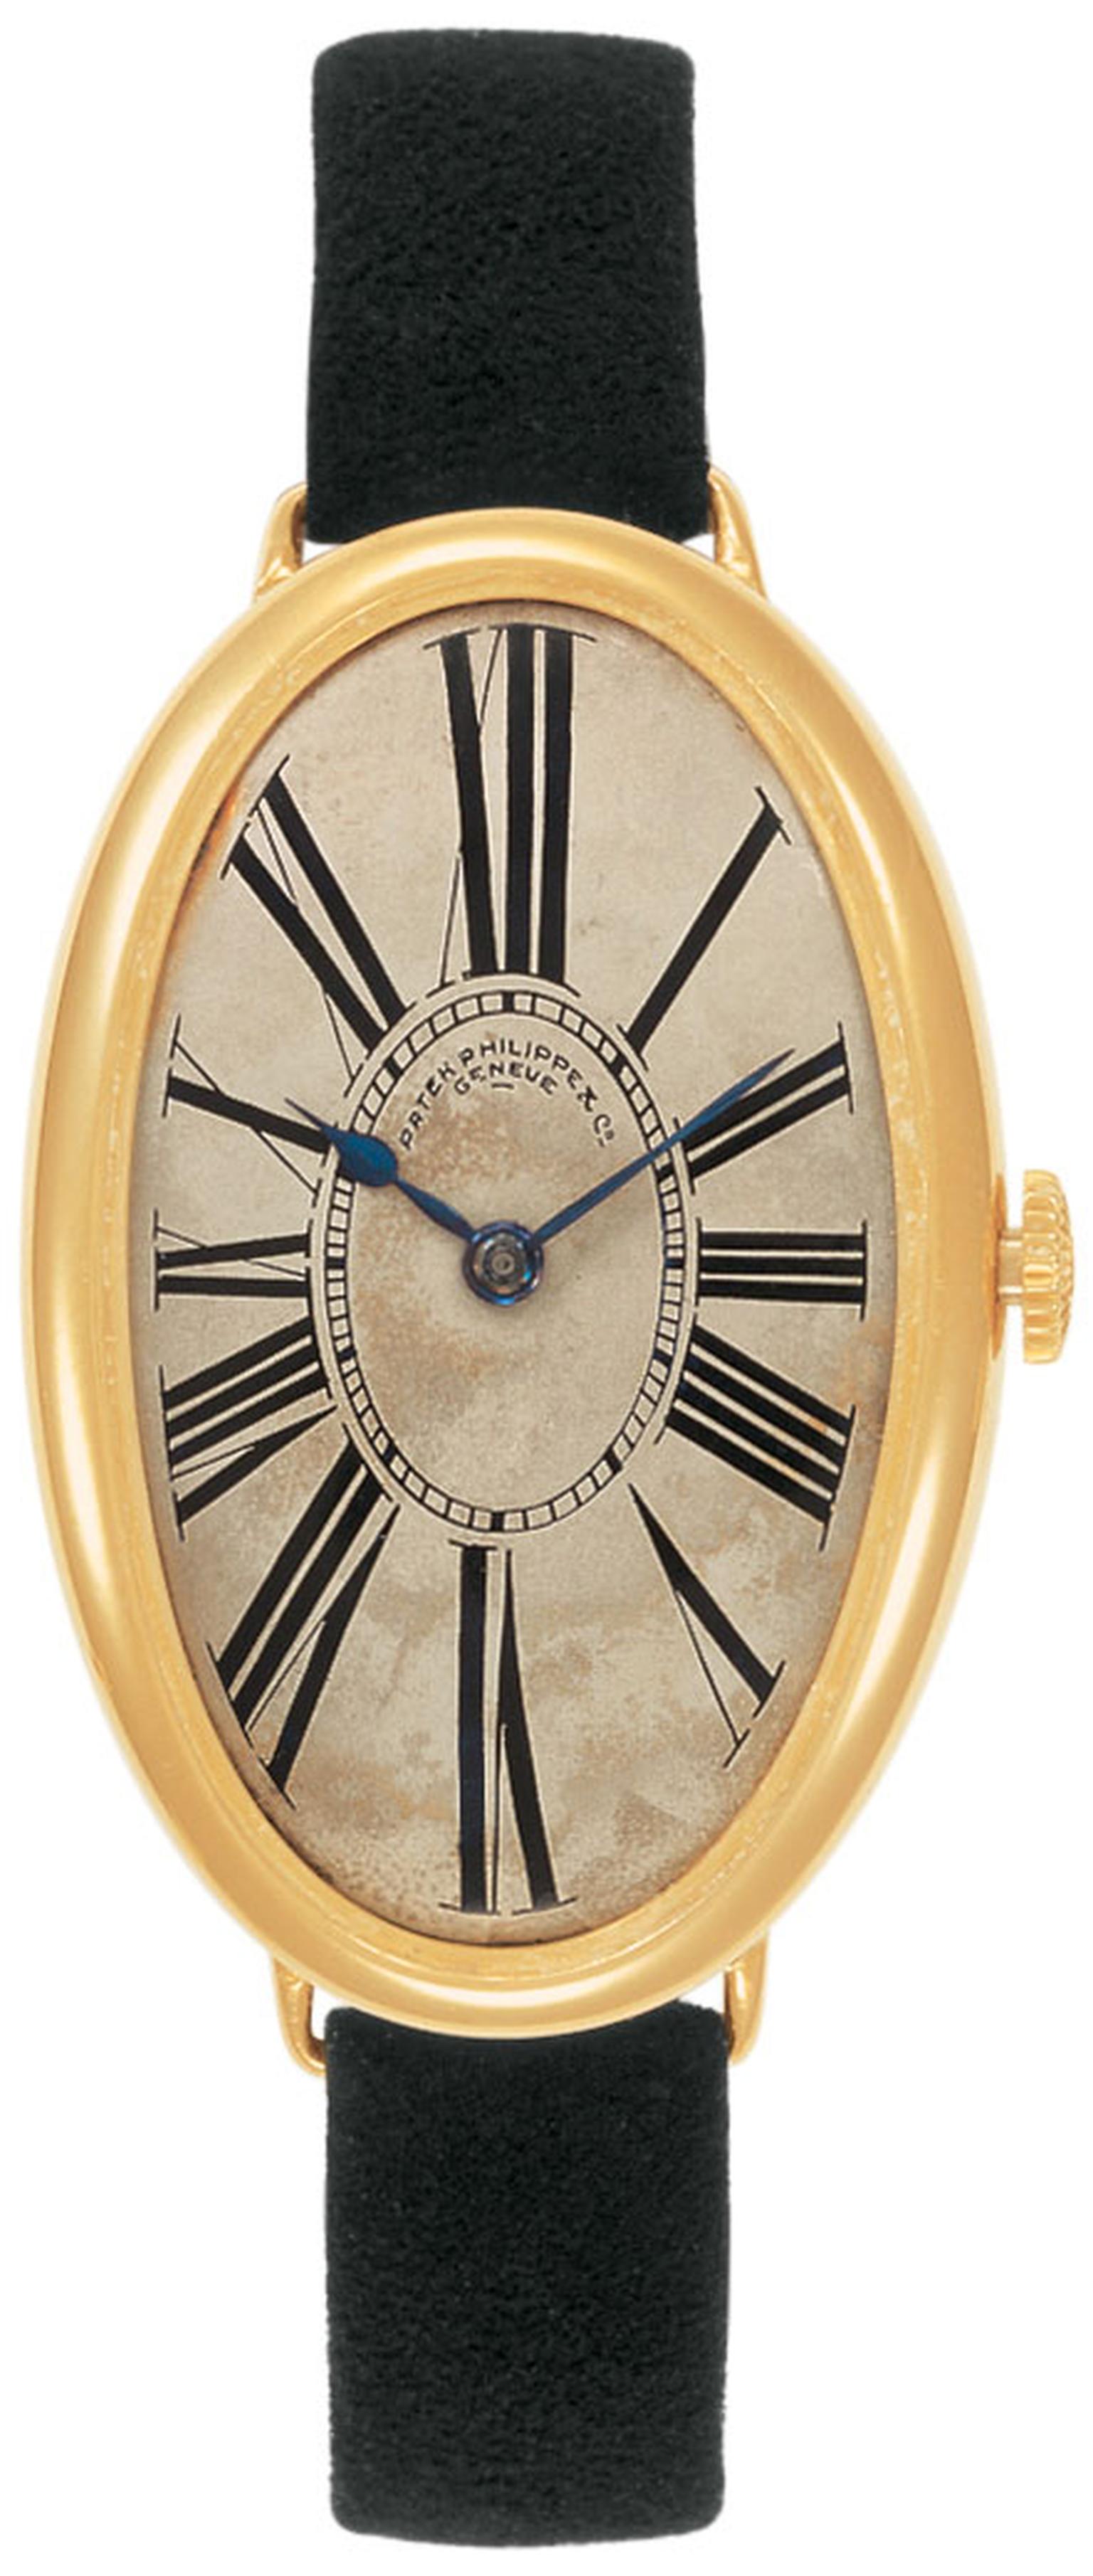 Patek-Philippe-P1155_a_100_collection--1915-25.jpg